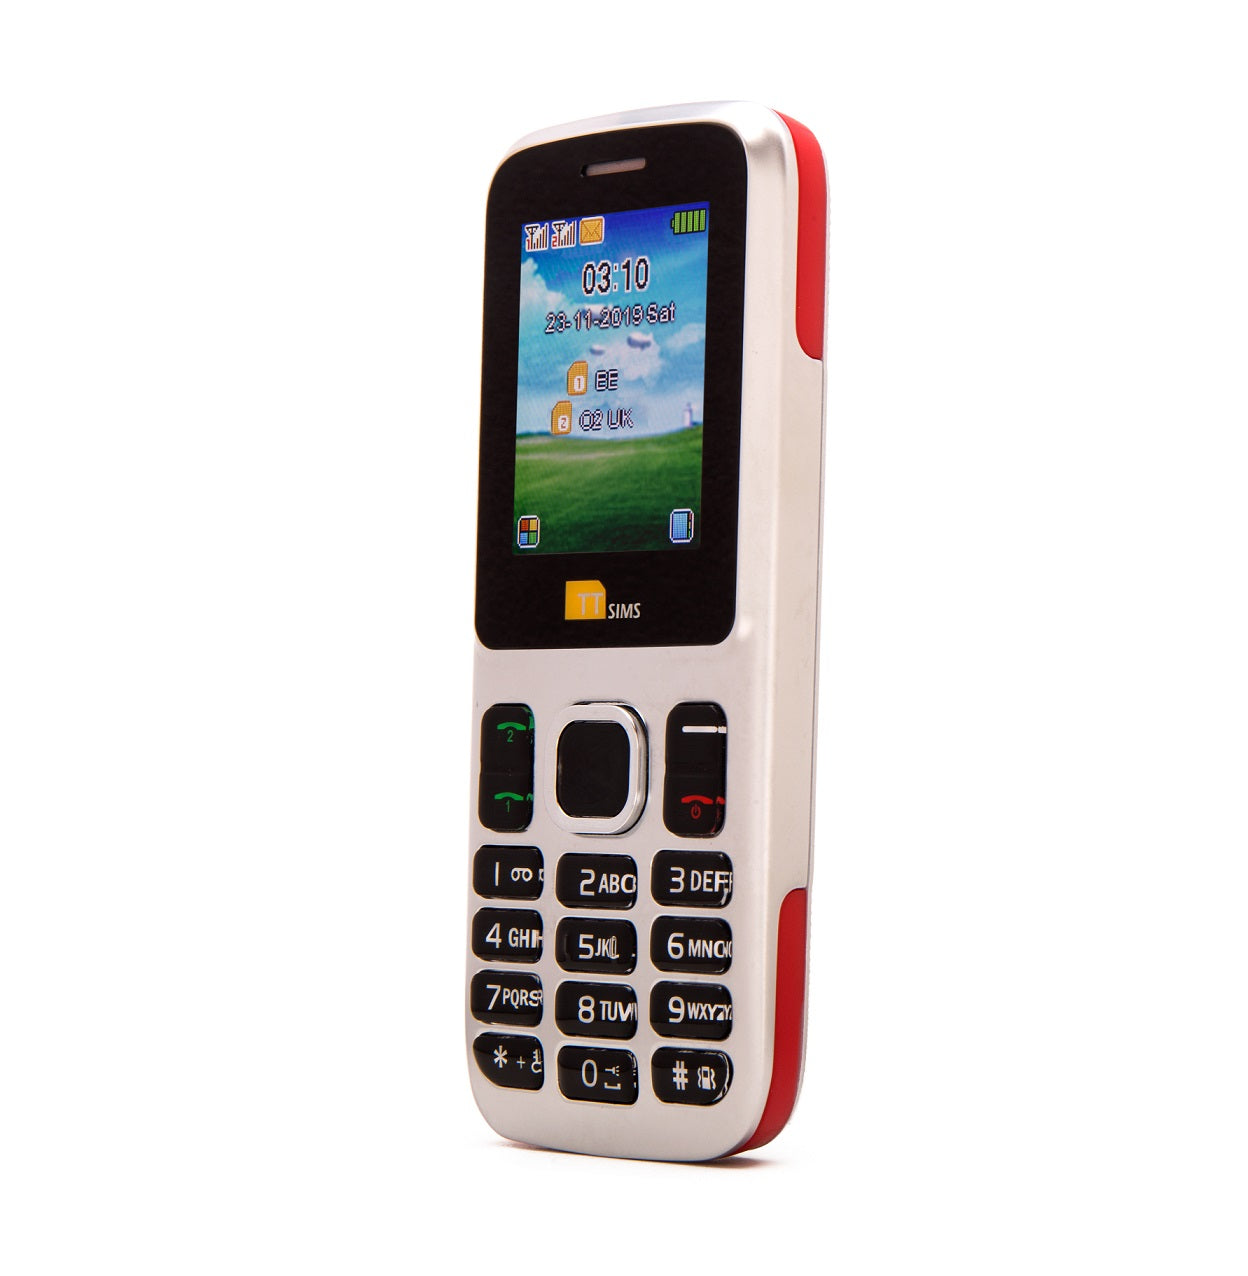 TTfone Red TT130 Dual Sim - Warehouse Deals with Mains Charger and O2 Pay As You Go